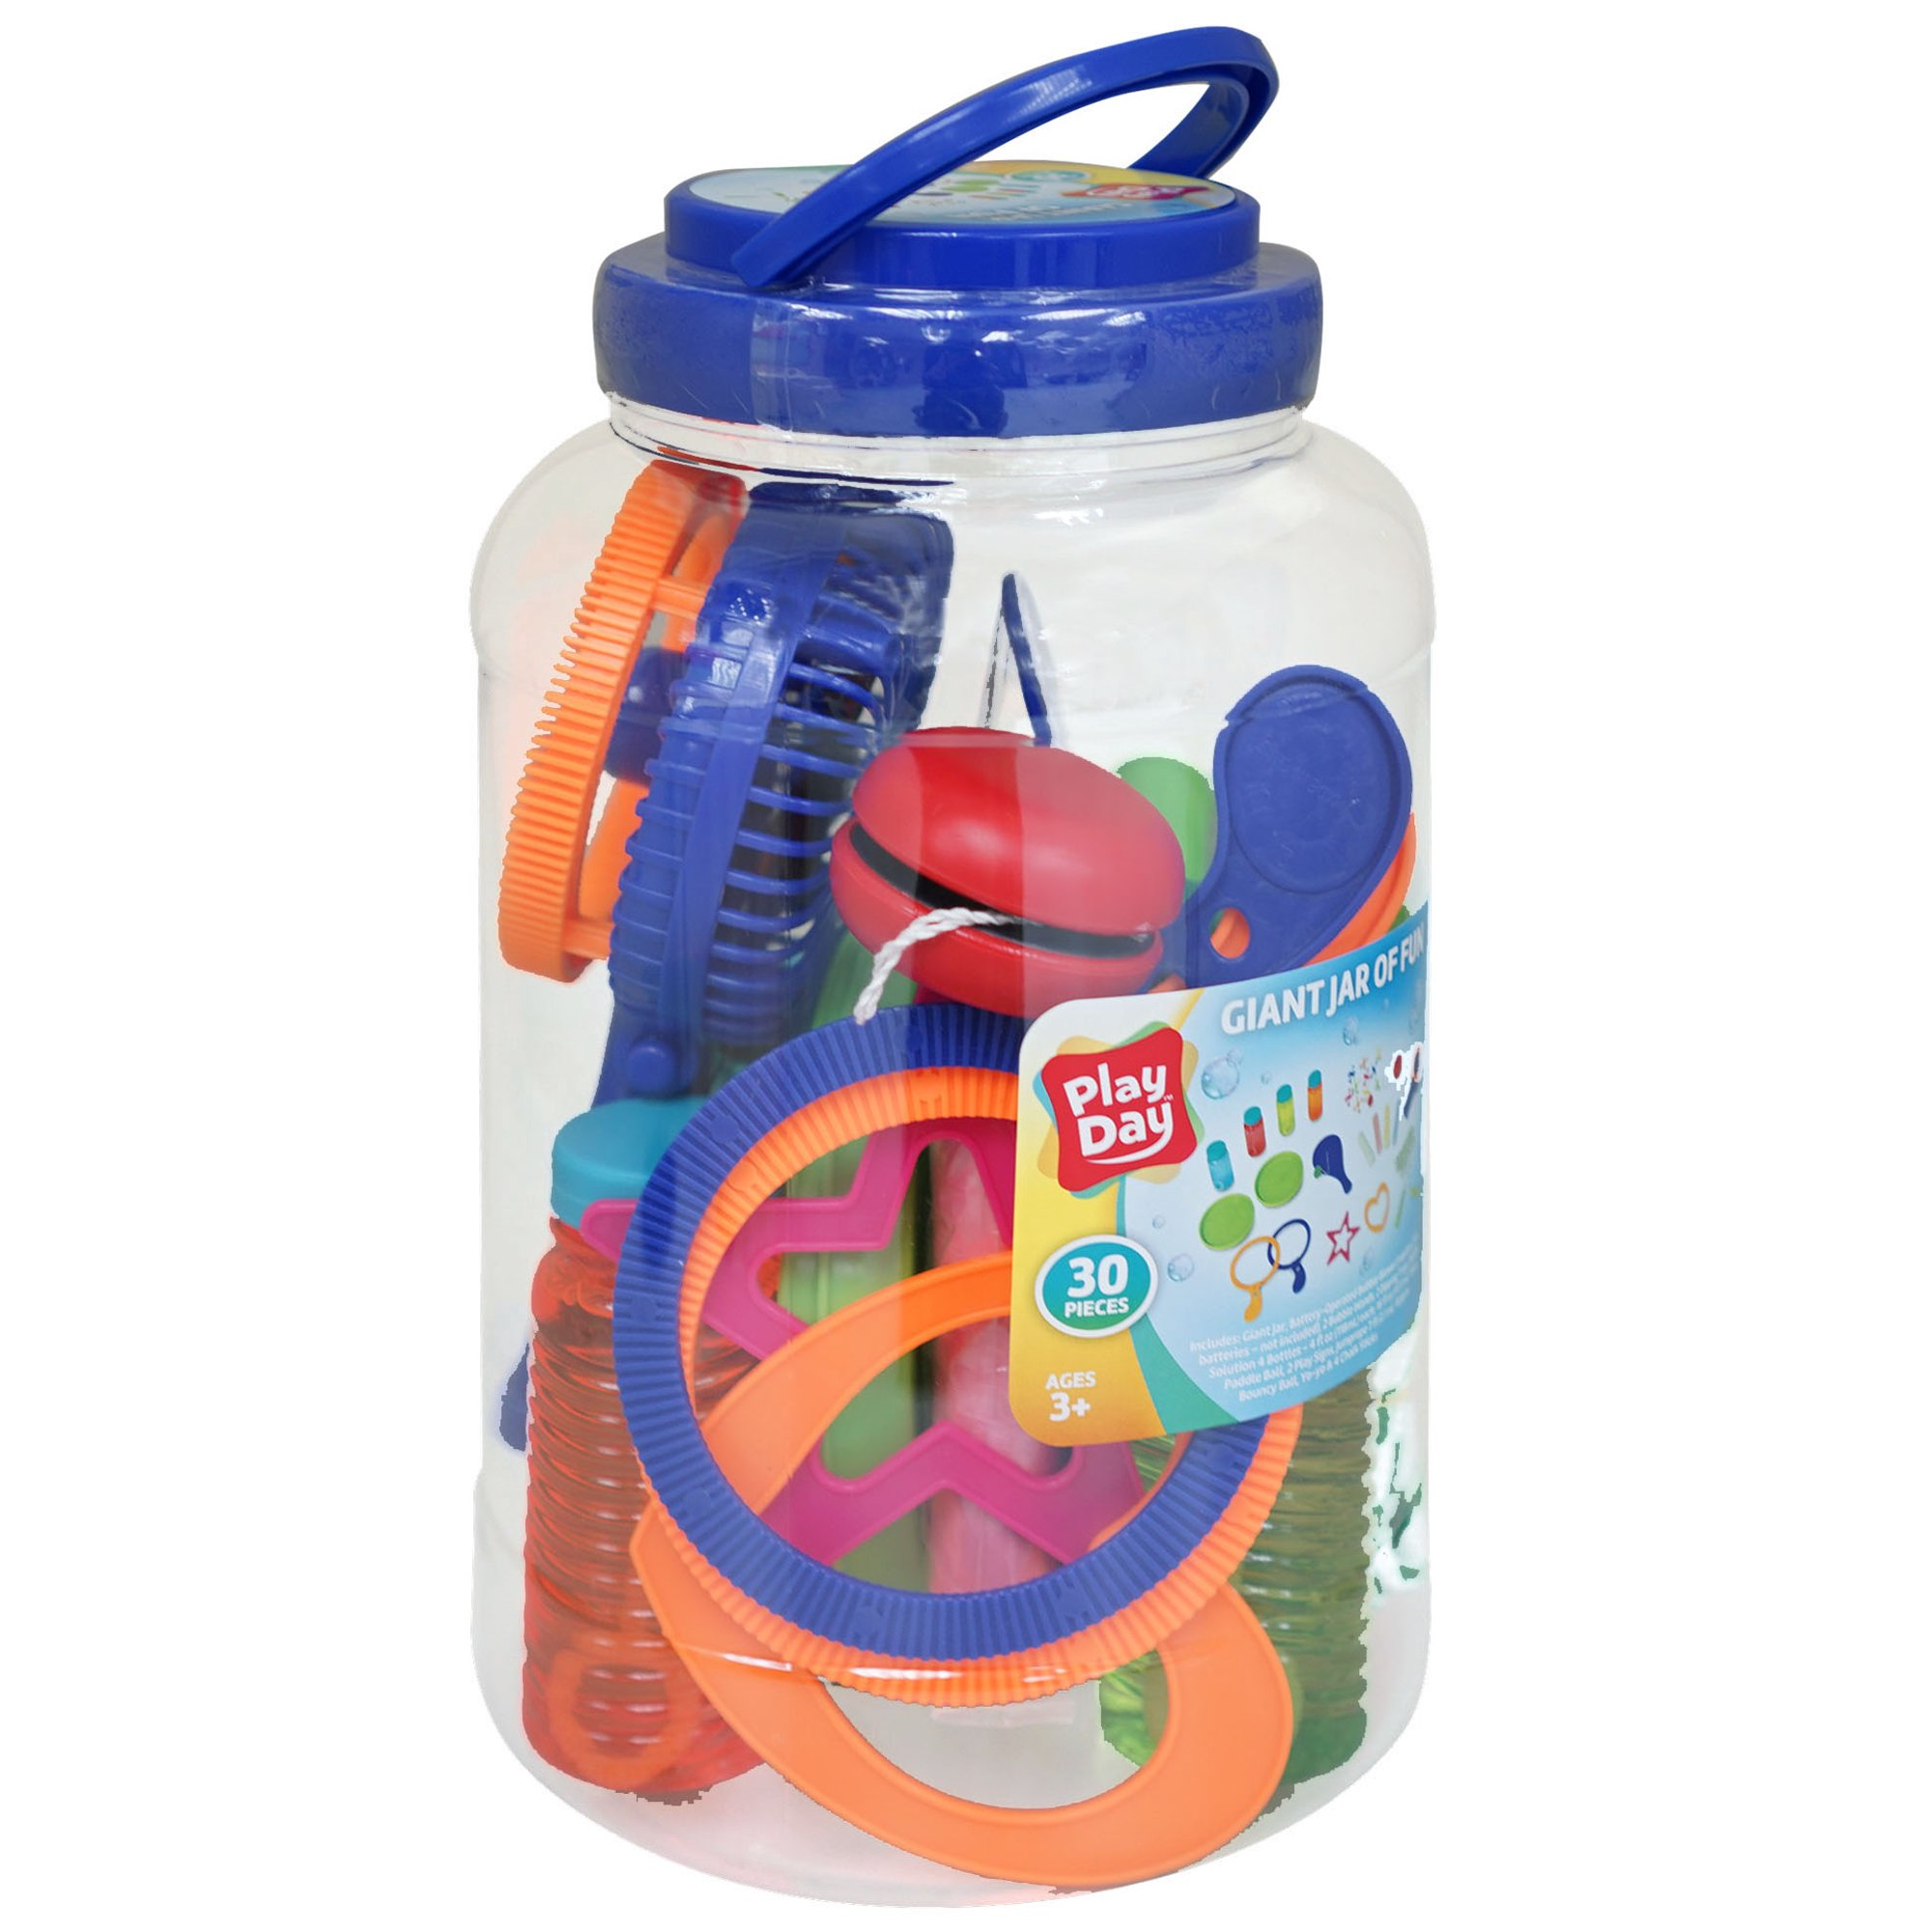 A jar filler with little toys